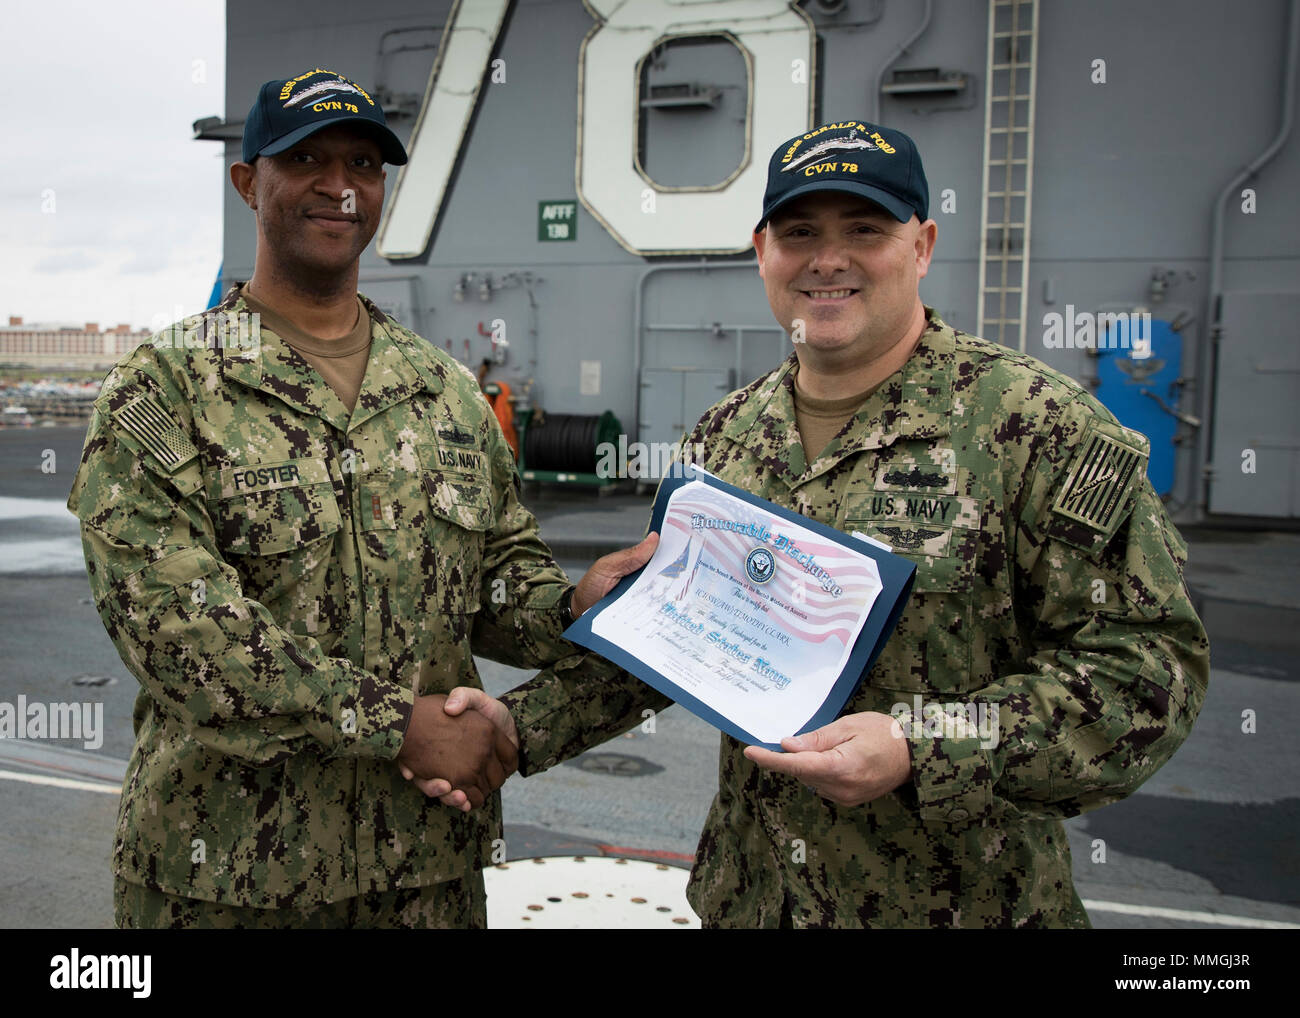 NORFOLK, Va. (May 07, 2018) -- Interior Communications Electrician 1st  Class Timothy Clark, from Hampton, Virginia, assigned to USS Gerald R.  Ford's (CVN 78) air department, receives an honorable discharge certificate  from